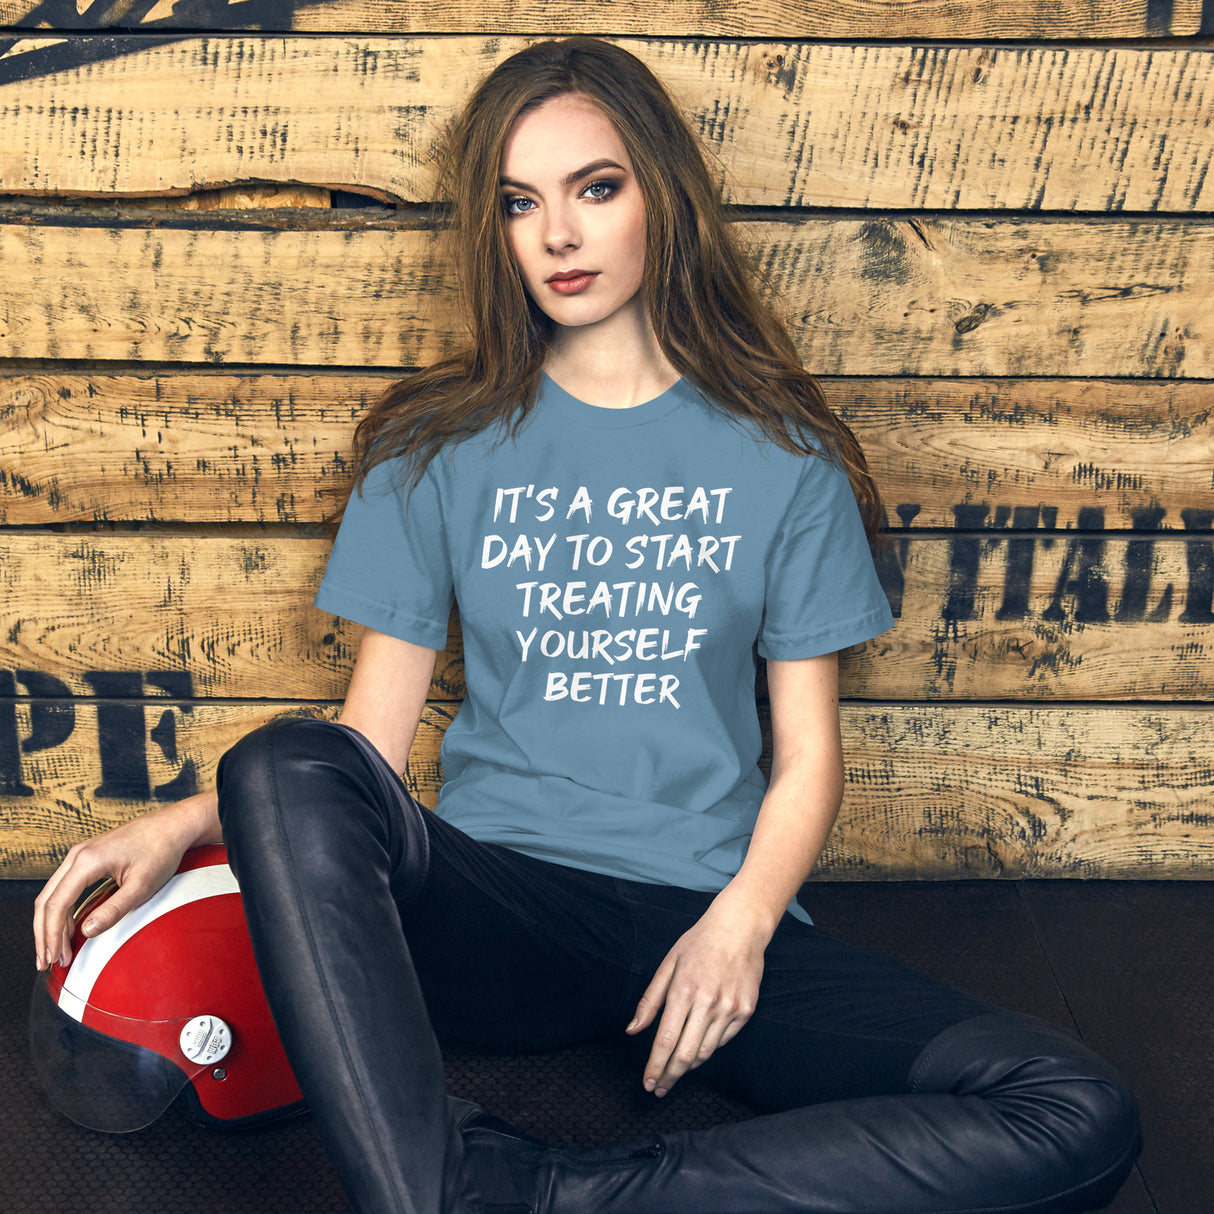 It's A Great Day To Start Treating Yourself Better Women's Shirt